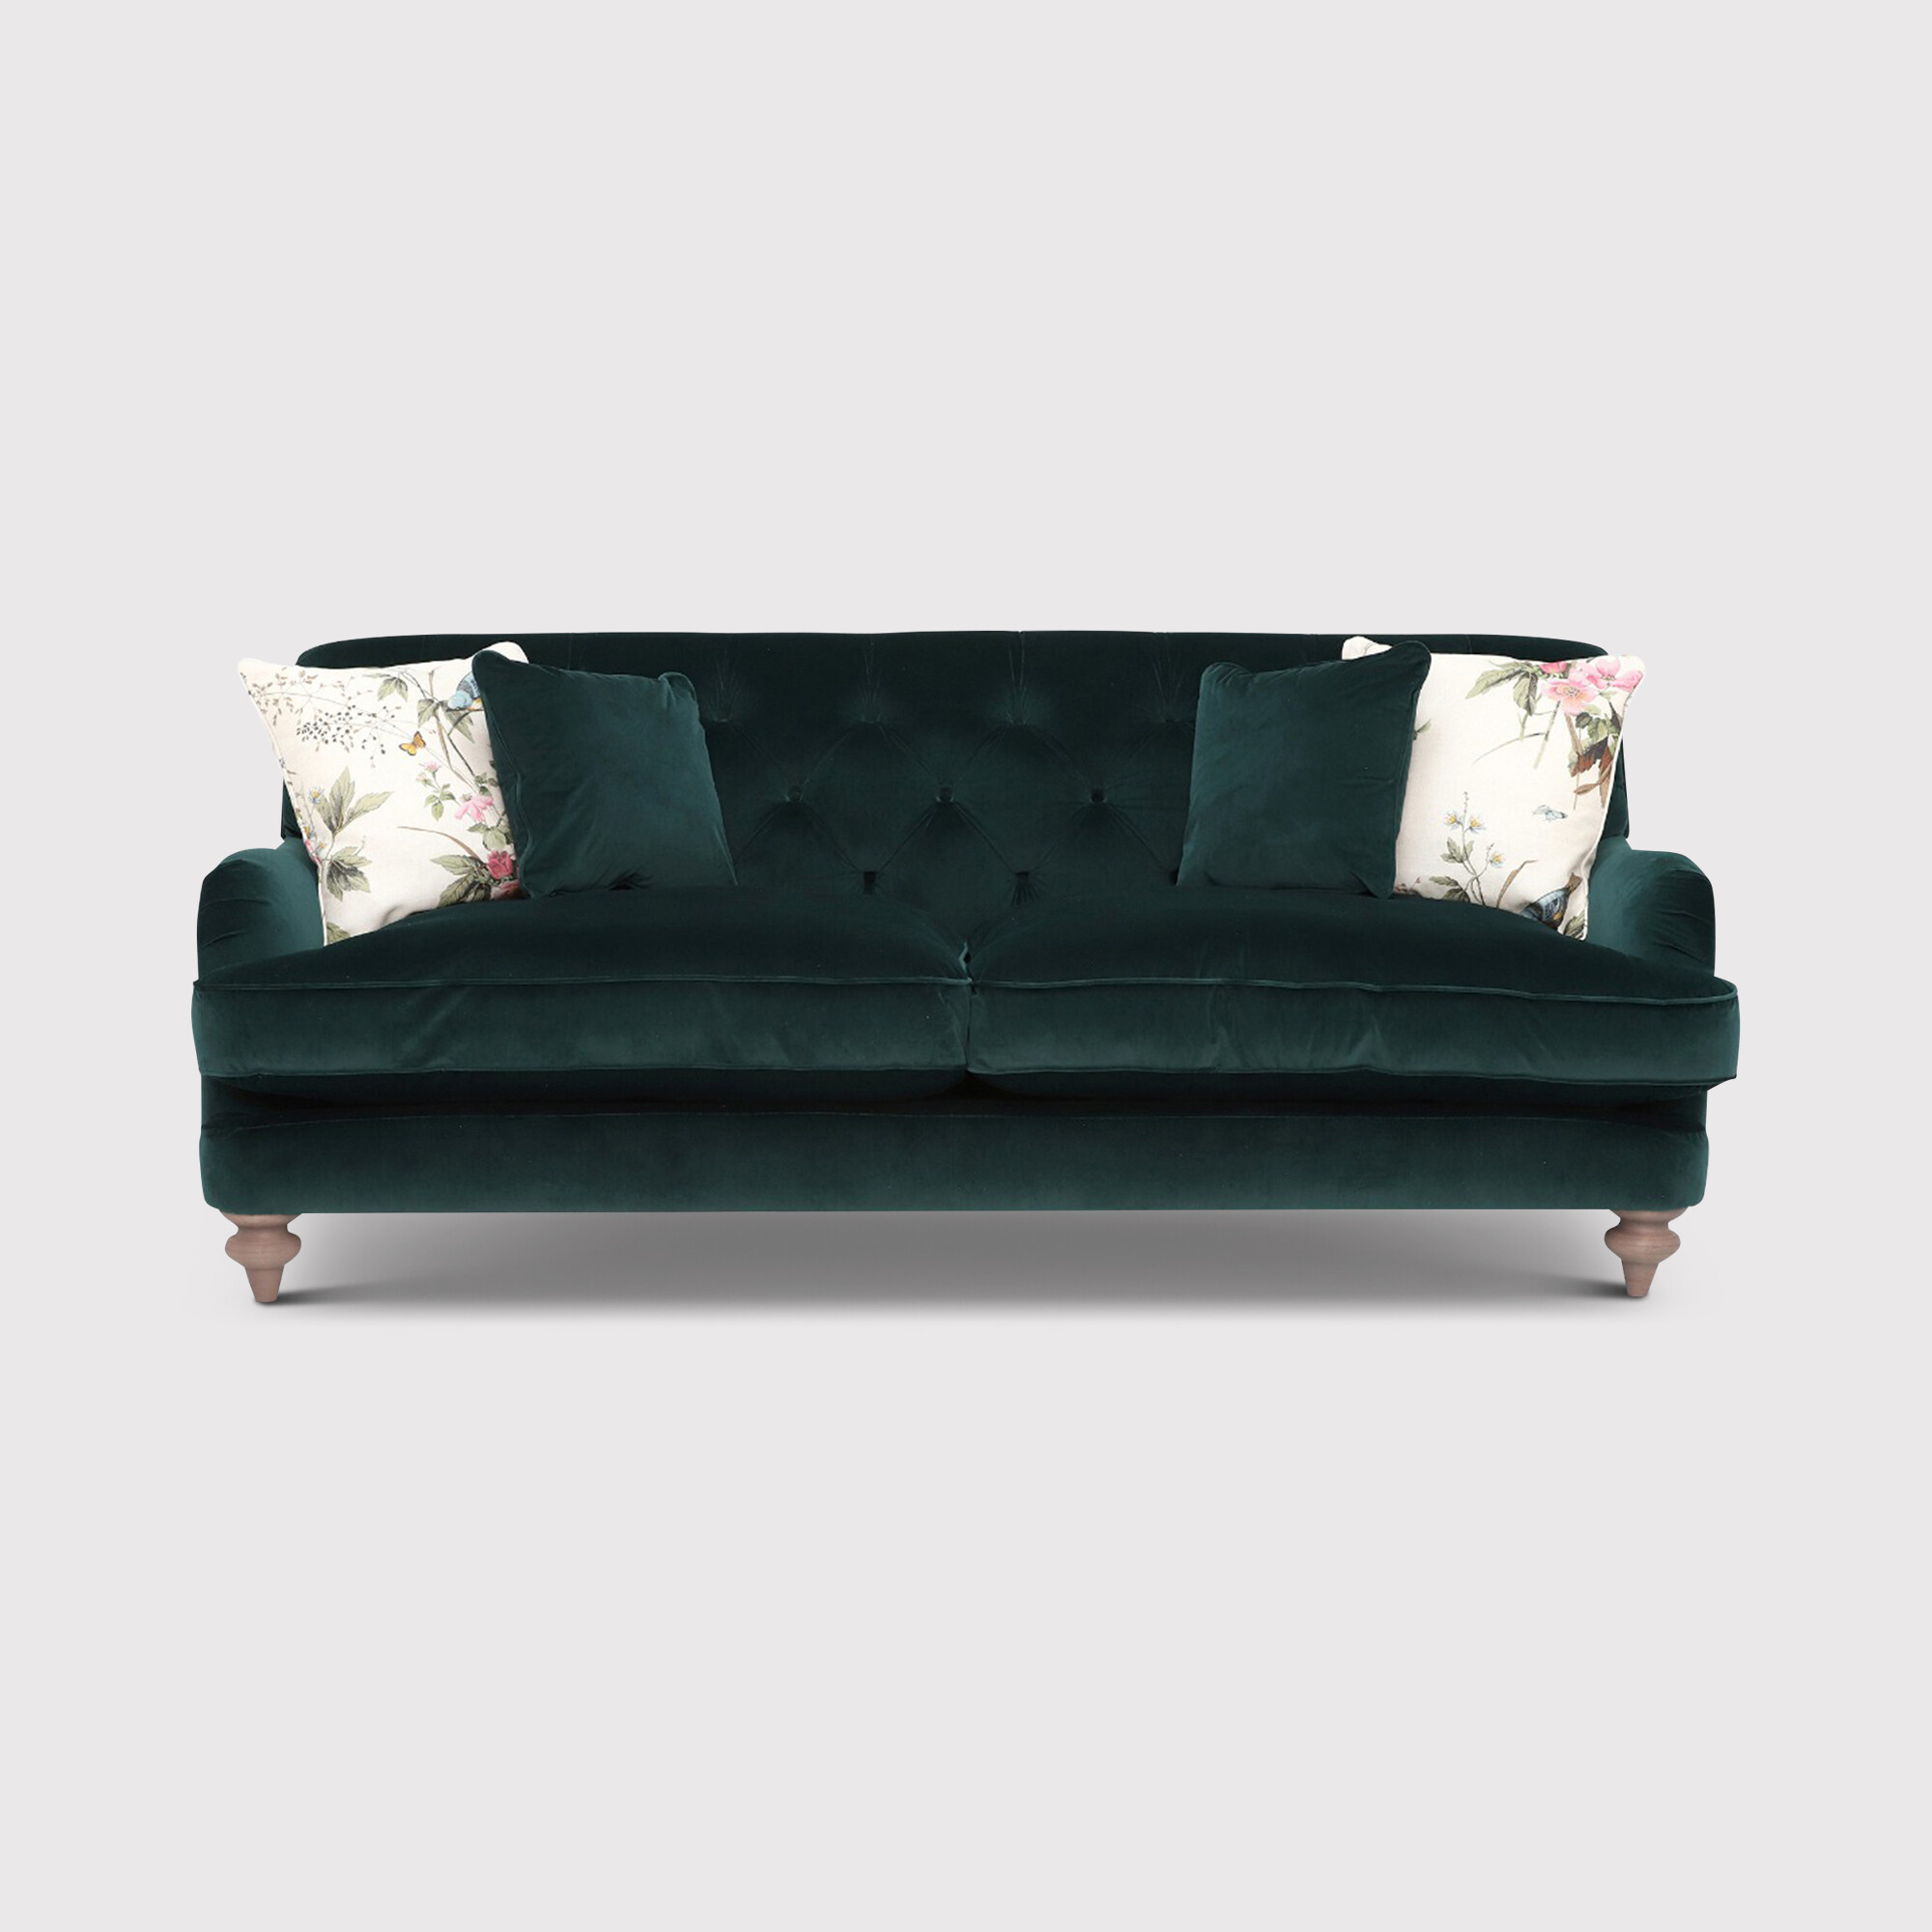 Windermere Extra Large Sofa, Green Fabric | Barker & Stonehouse